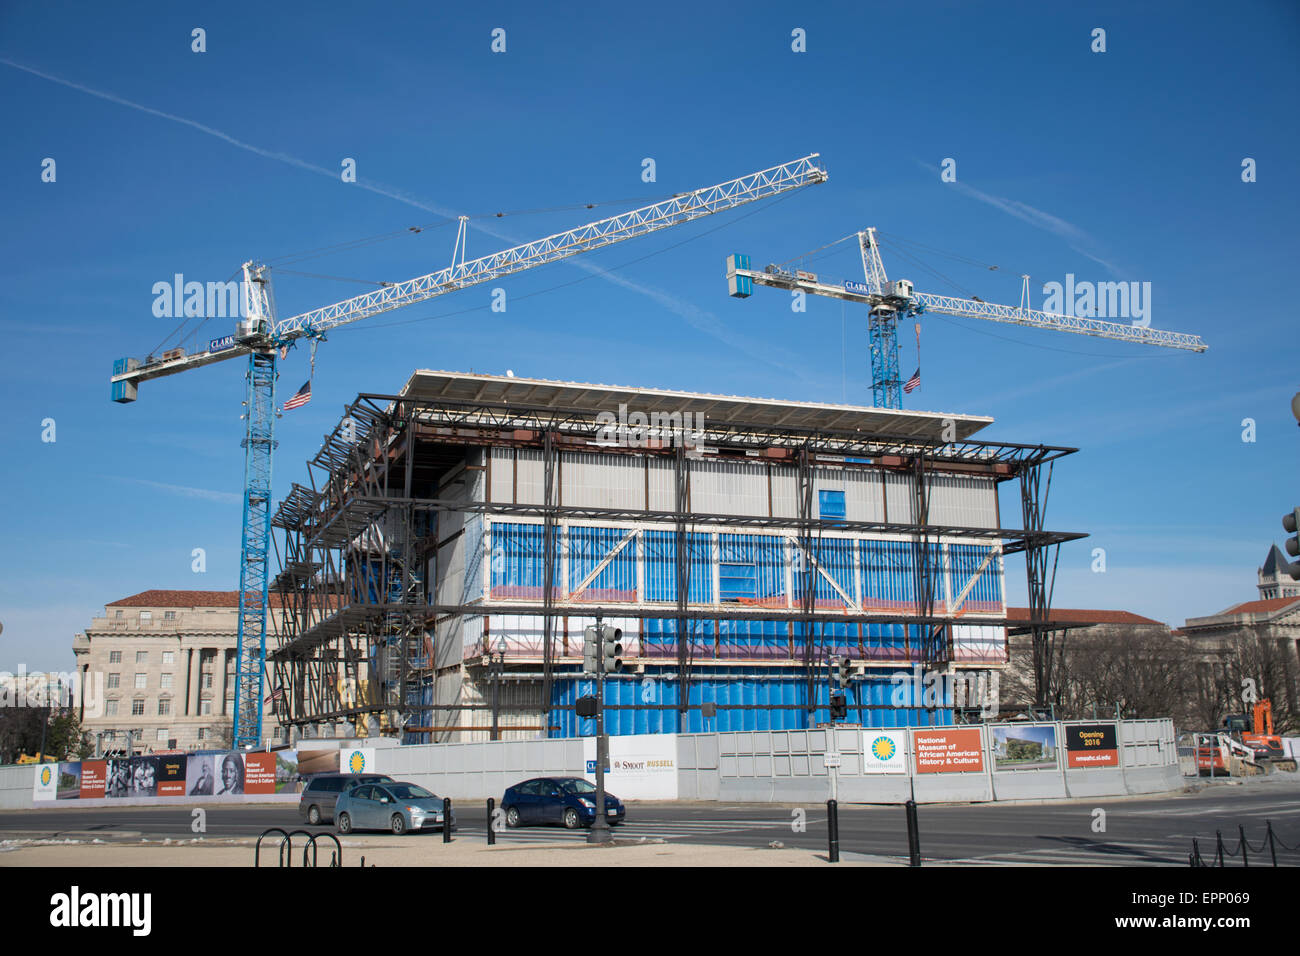 WASHINGTON DC, USA - The progress of construction of the Smithsonian African American Museum as of January 2015. The museum is located on the National Mall, near the Washington Monument, and is scheduled to open in 2016. Stock Photo